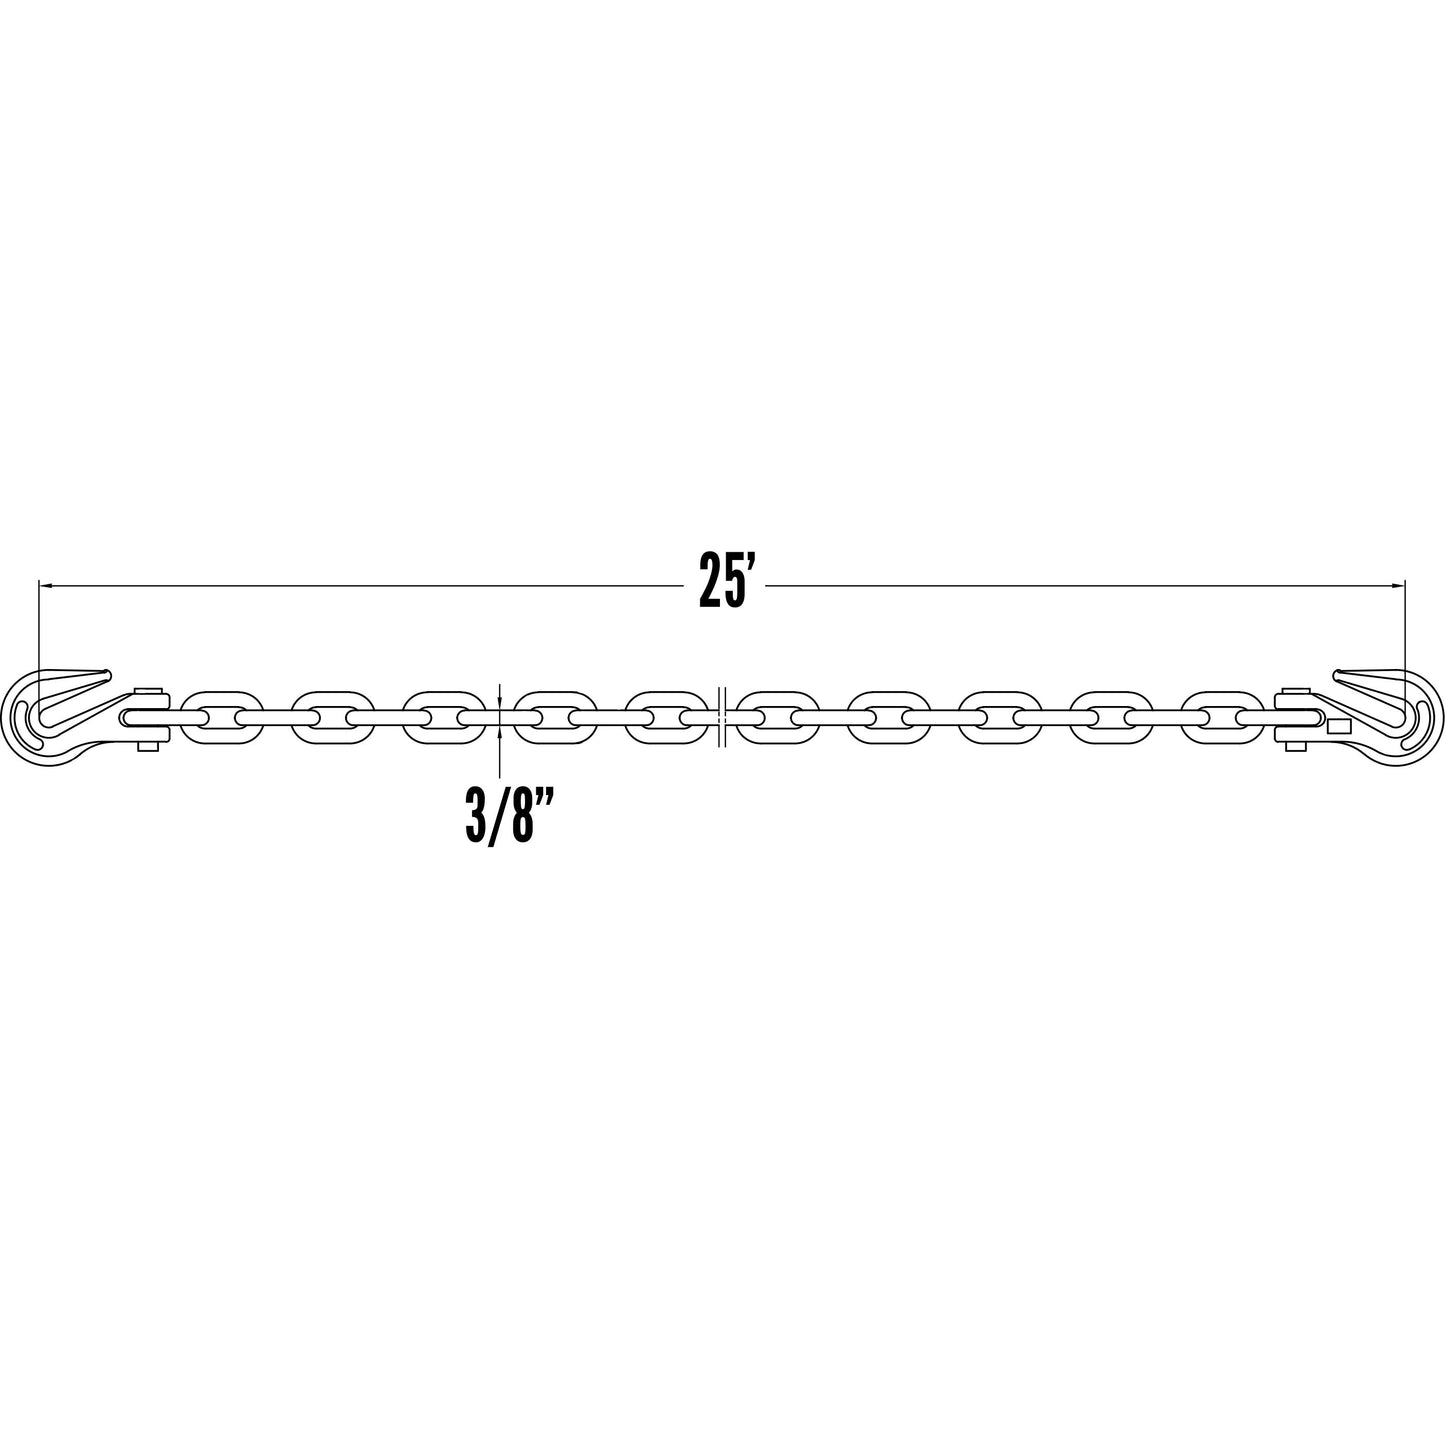 Transport Chain Grade 70 38 inch x 25 foot Made in USA image 4 of 7